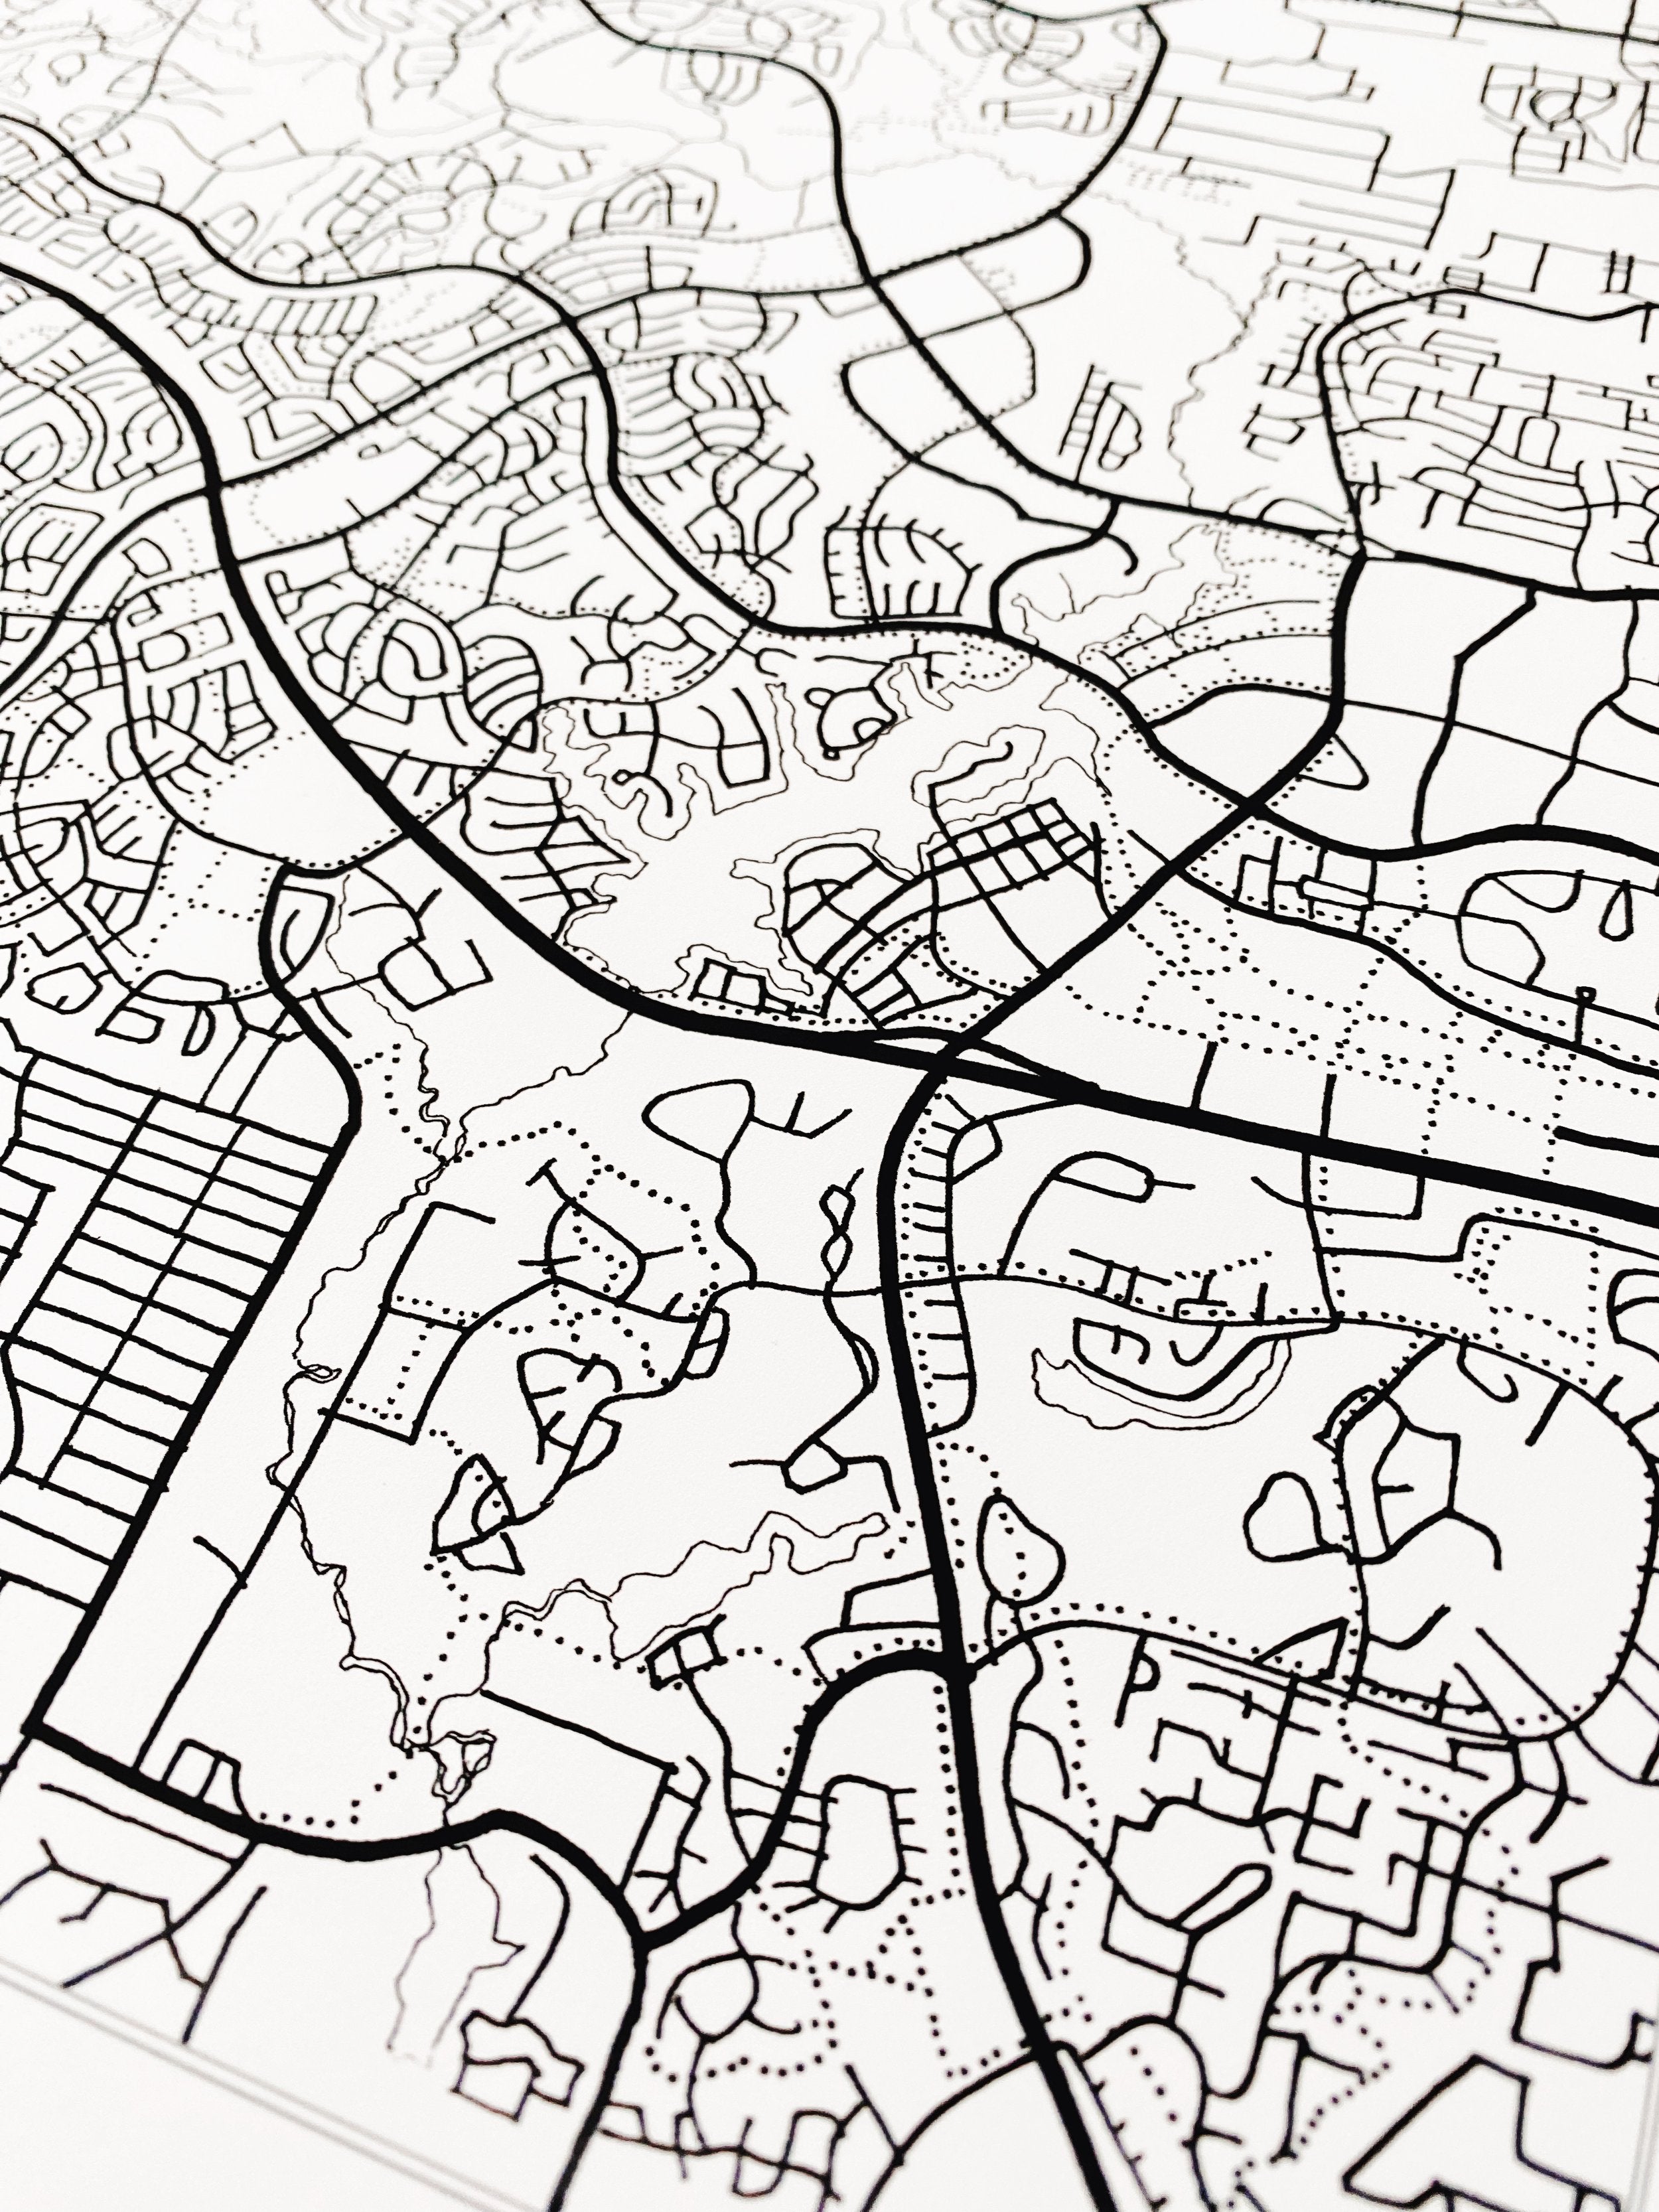 The WOODLANDS City Lines Map: PRINT